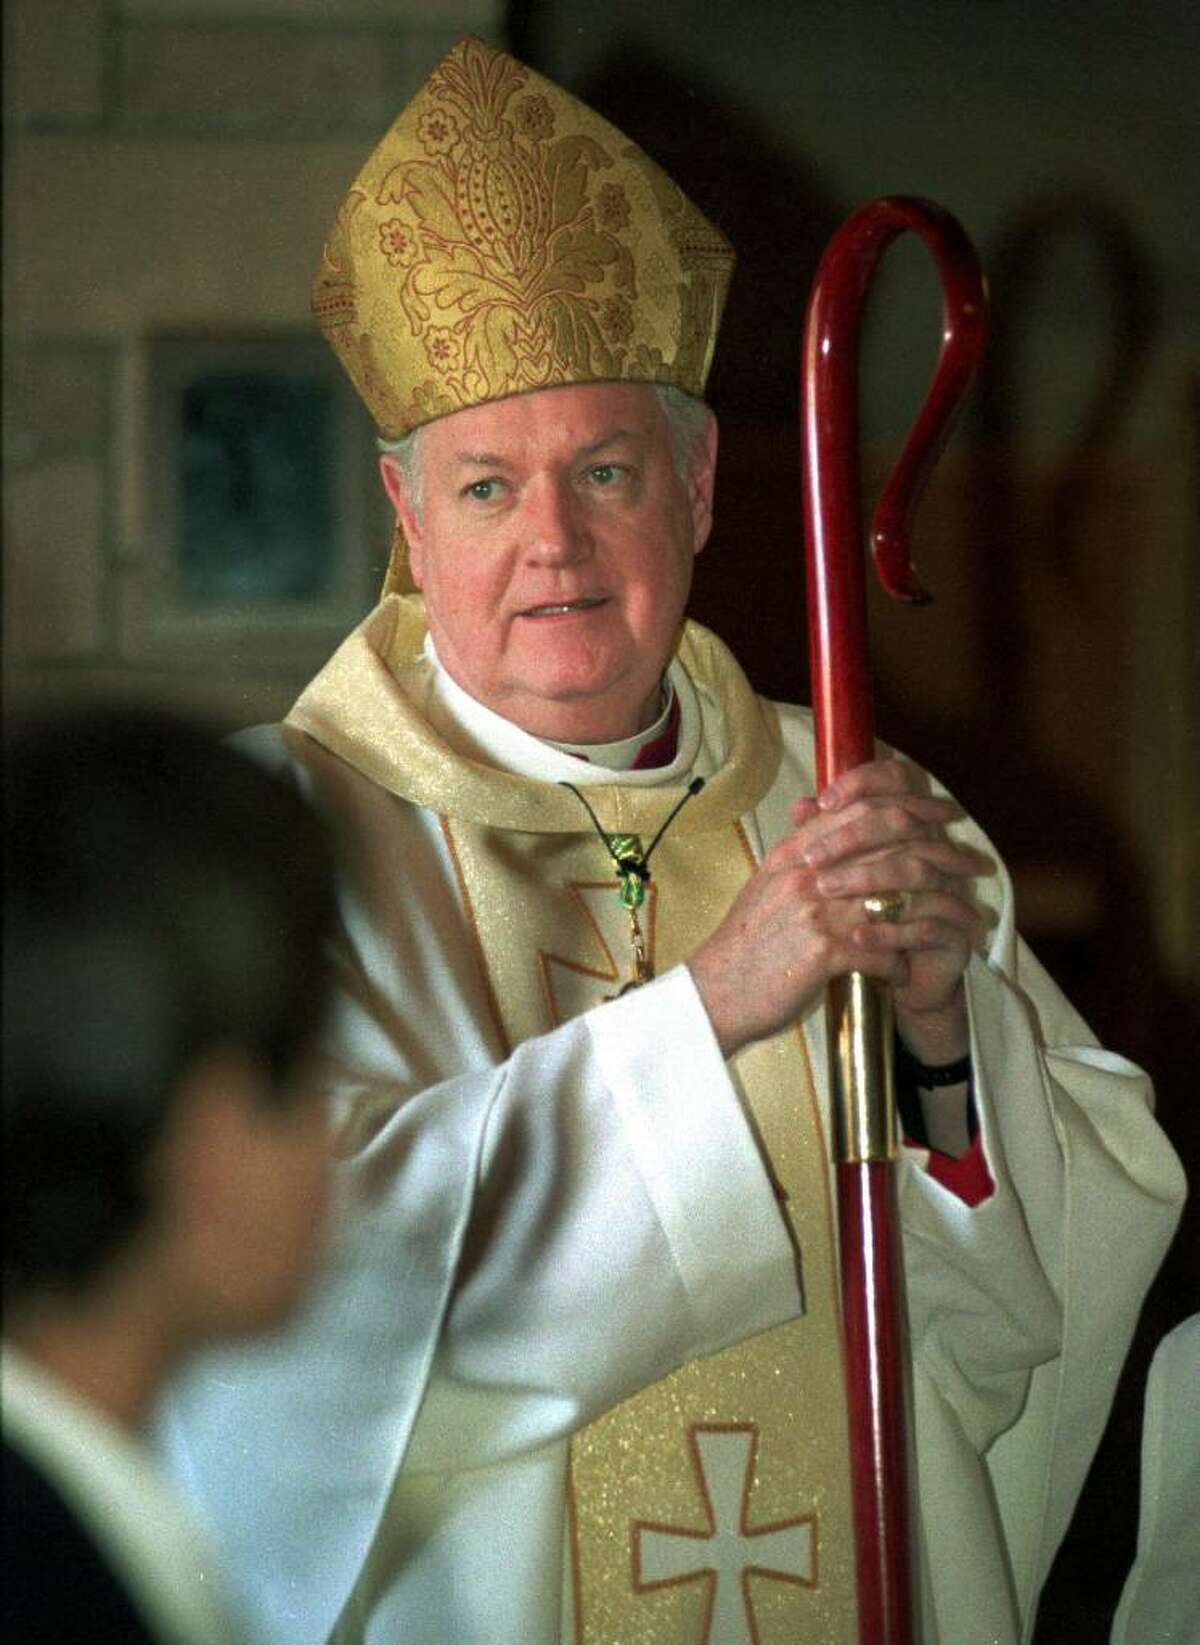 Cardinal Edward Michael Egan, photographed in Bridgeport, Conn. on May 11th, 1997. Egan served as Bishop of the Roman Catholic Diocese of Bridgeport from 1988-2000.